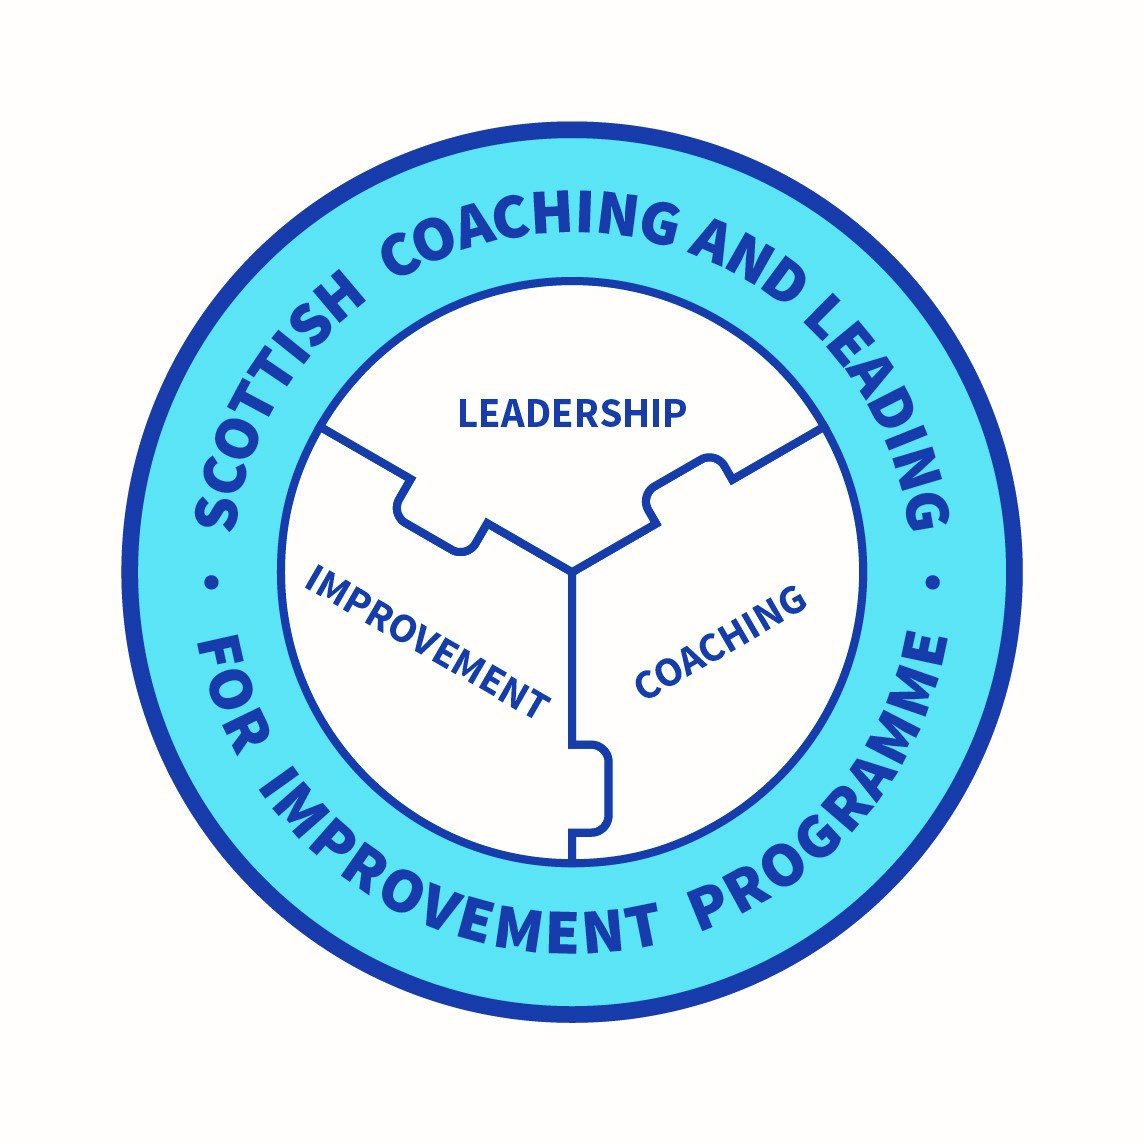 Started SCLIP…off to a great start reflecting on knowledge and understanding I’ve gained over the years! Looking forward to the next few months to build on those skills…#coaching #leadership #SCLIP #qualityimprovement #workingtogether #qualitymanagement #improvement